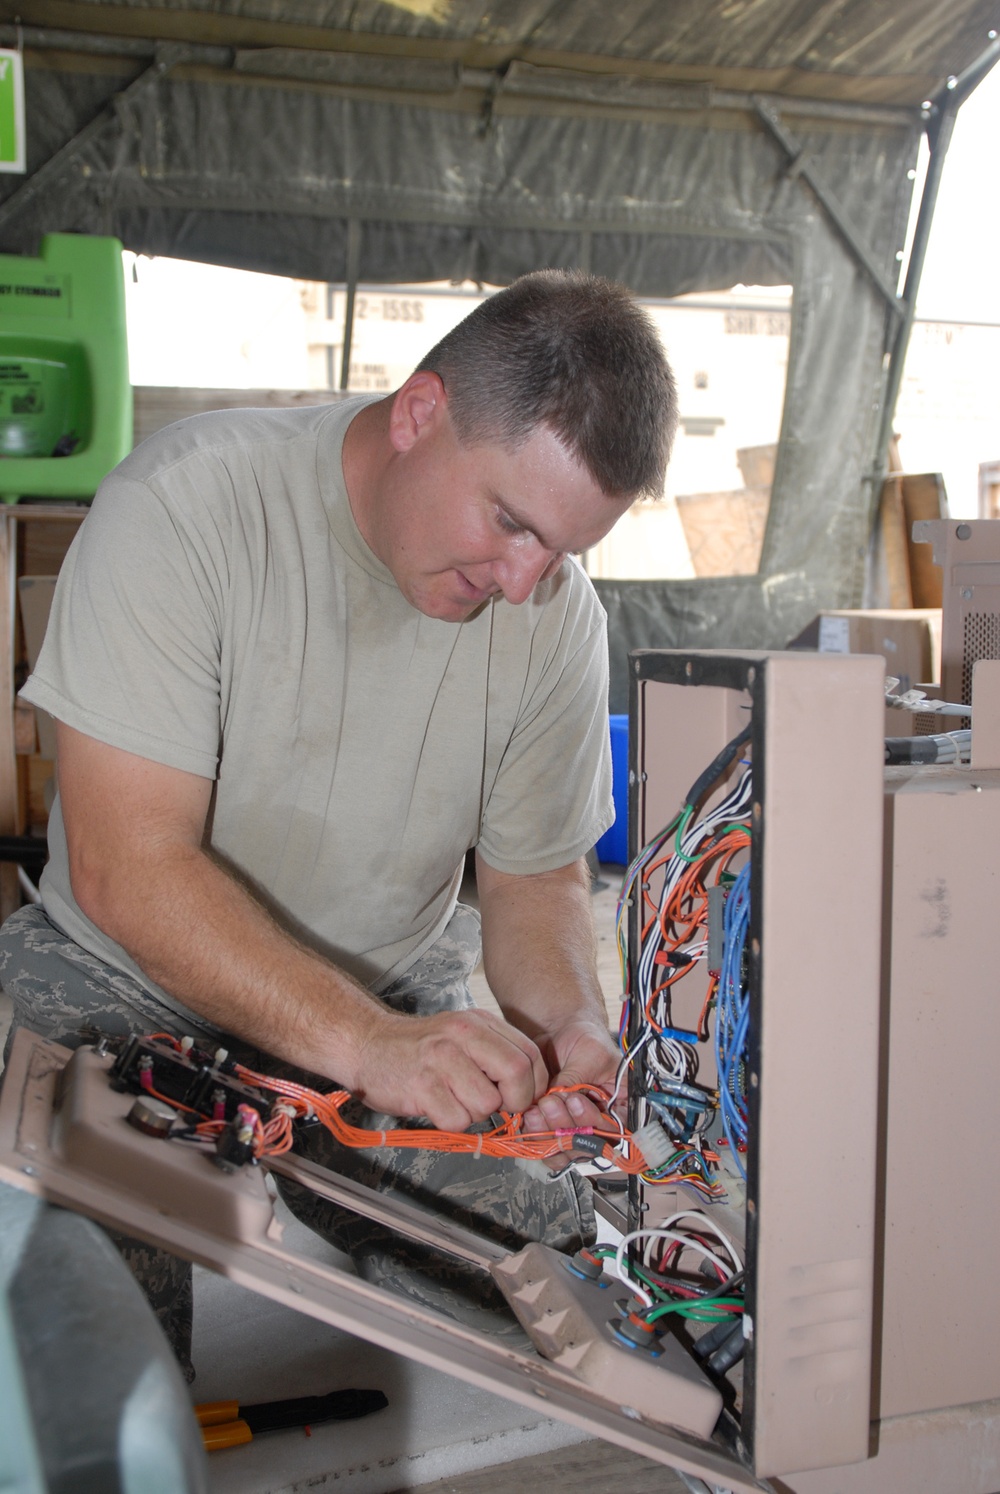 474th Expeditionary Civil Engineer Squadron maintains equipment